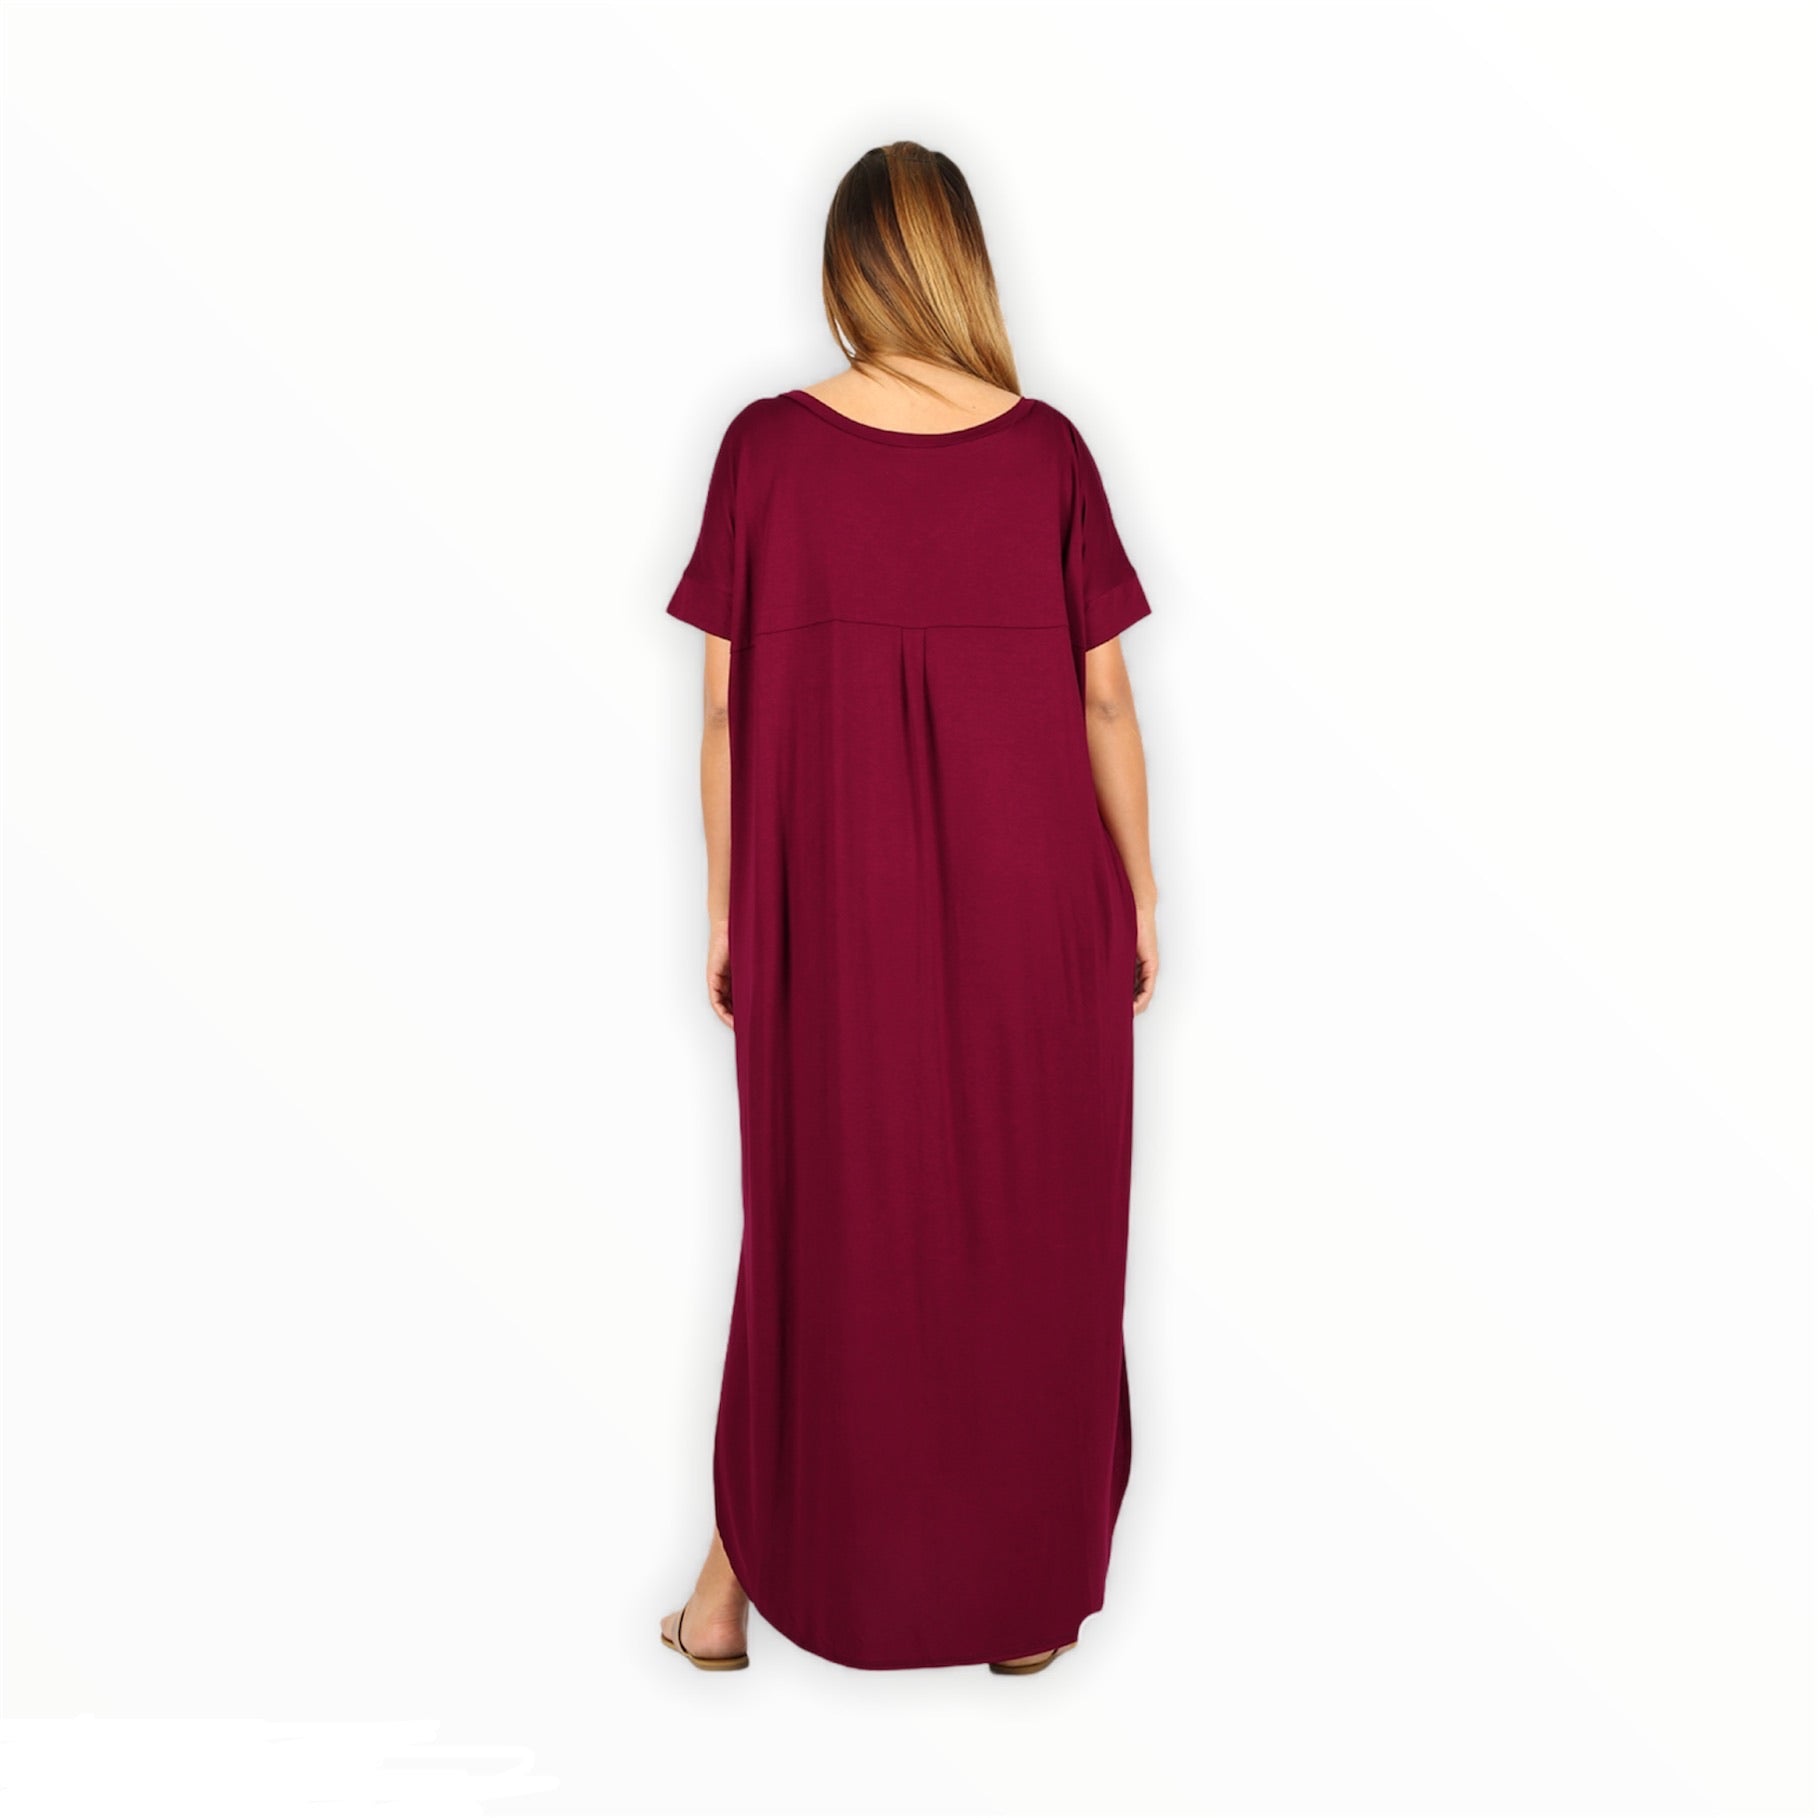 Red maxi dress - Iconic Style Shop